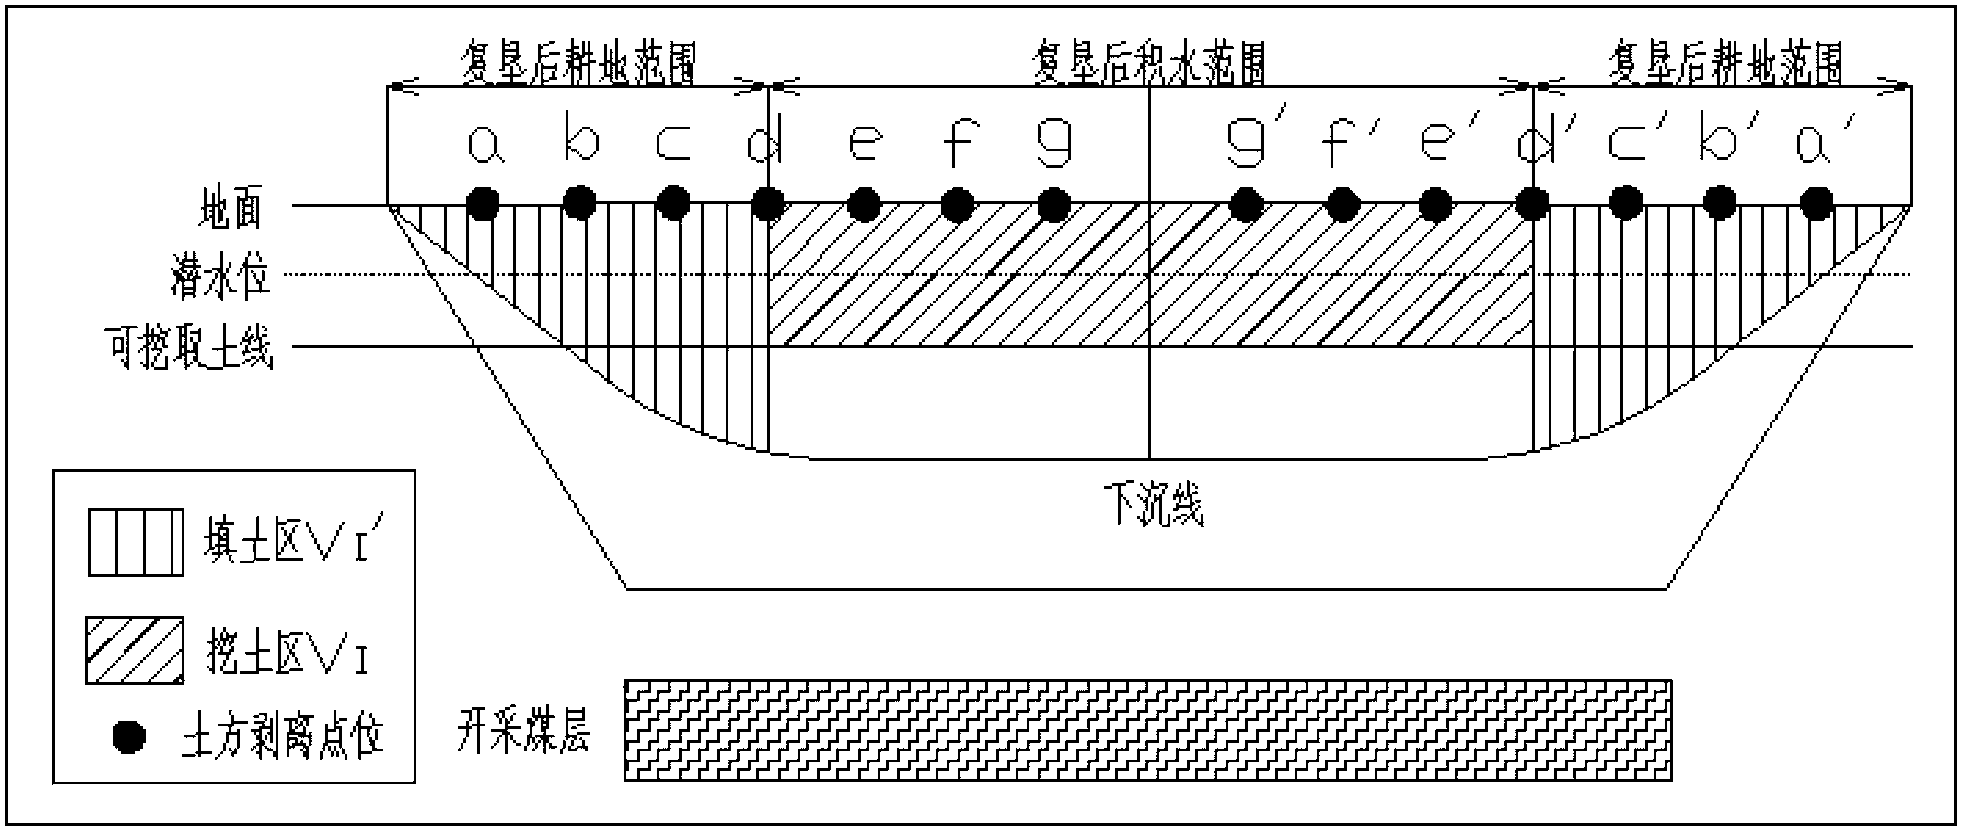 Earthwork balance based dike-pond layout method used for coal mining while refilling in coal-mining subsidence